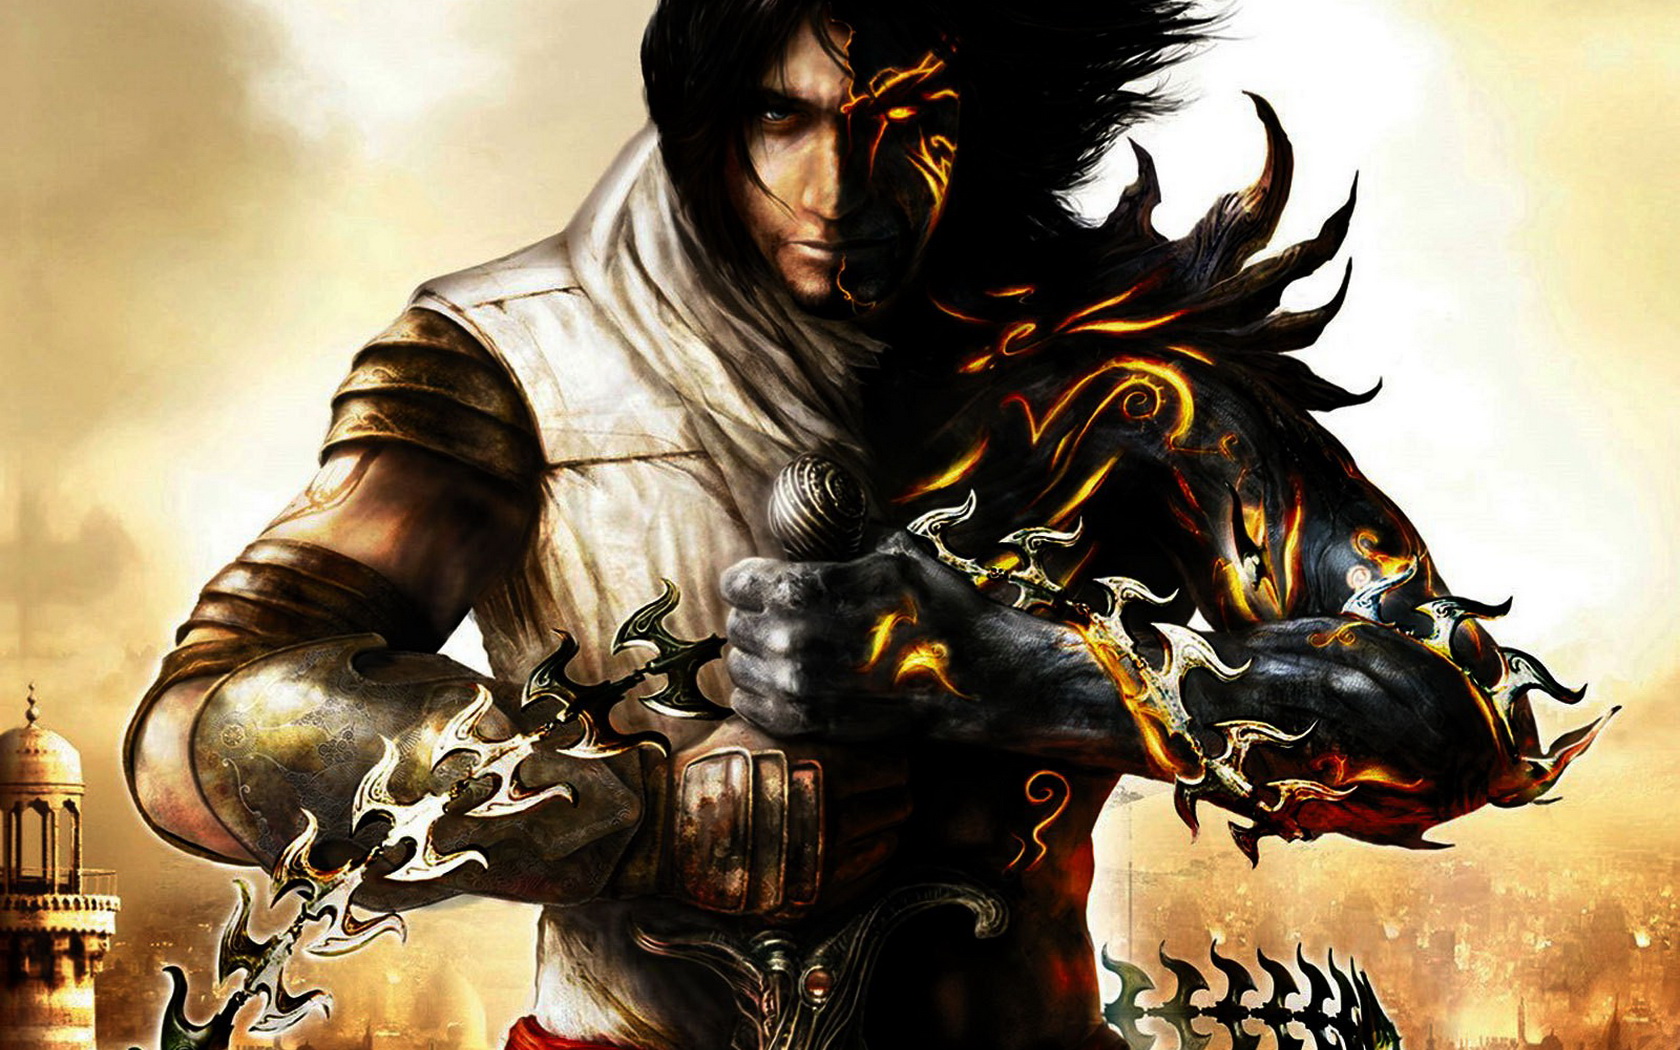 prince of persia the two thrones